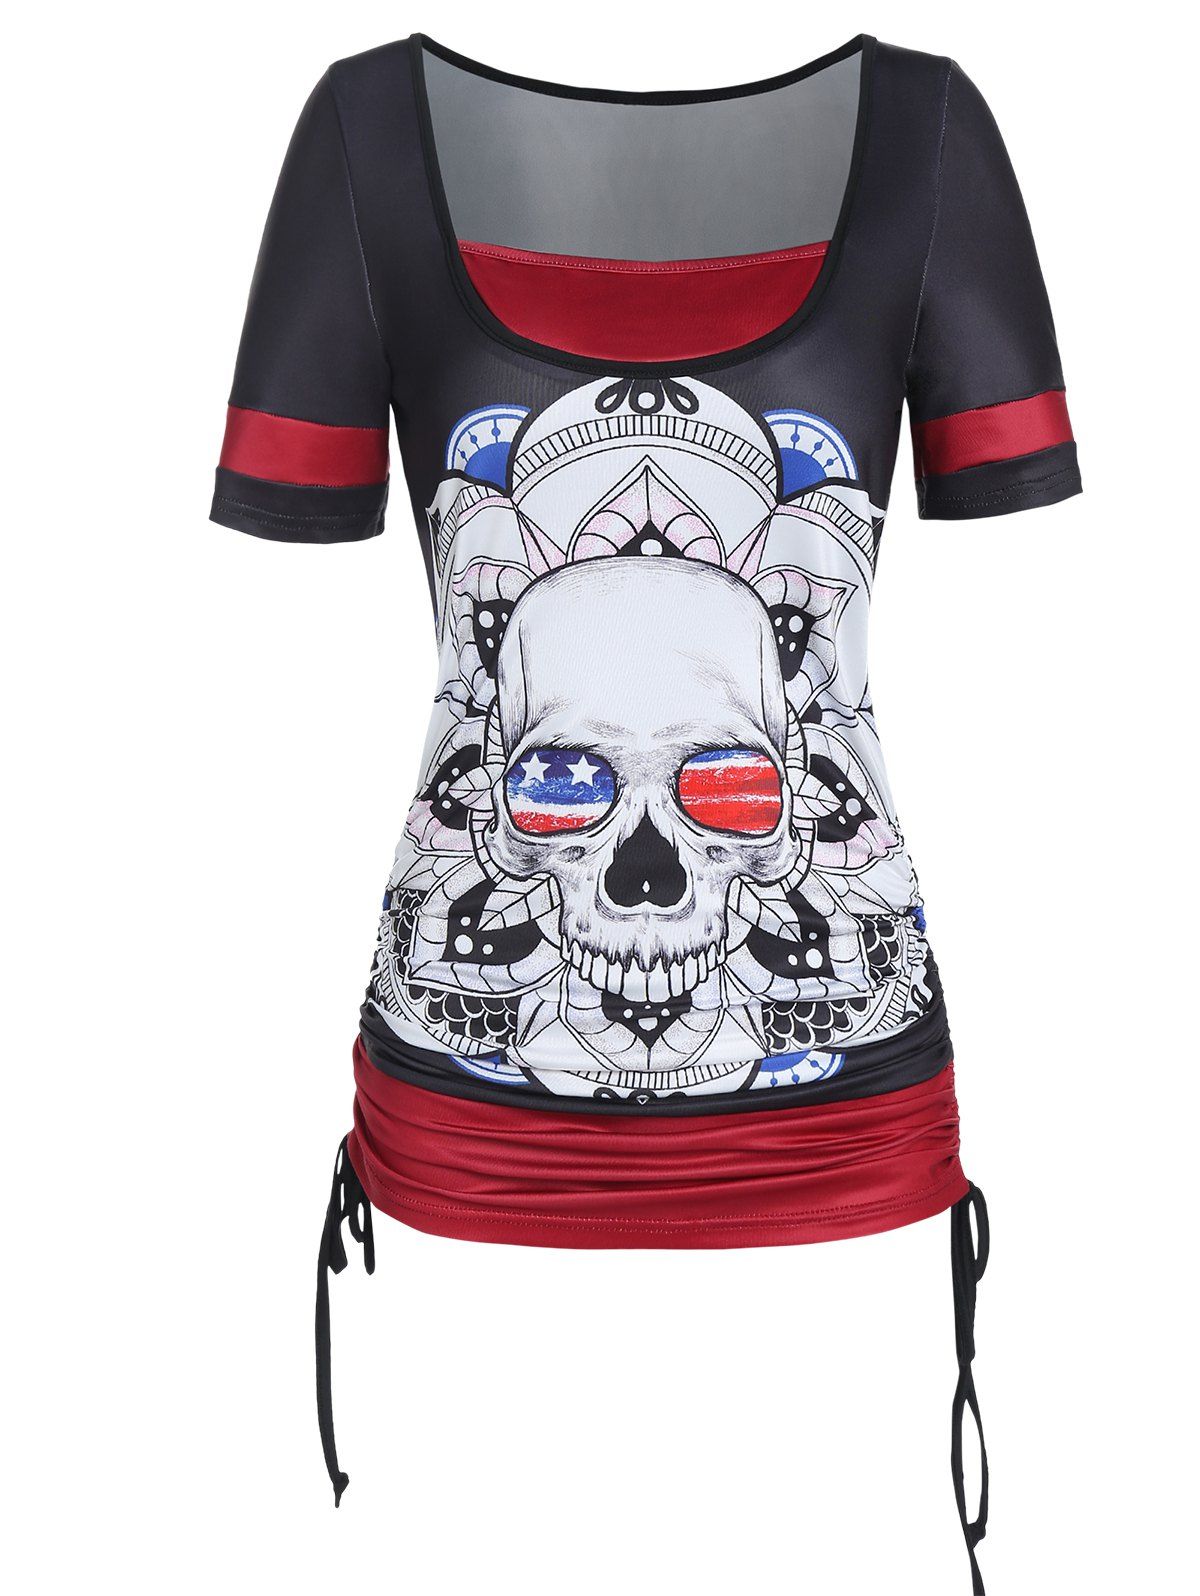 Contrast Colorblock Twofer T Shirt Skull Floral American Flag Print Ruched Cinched Summer Casual Tee - BLACK XXXL